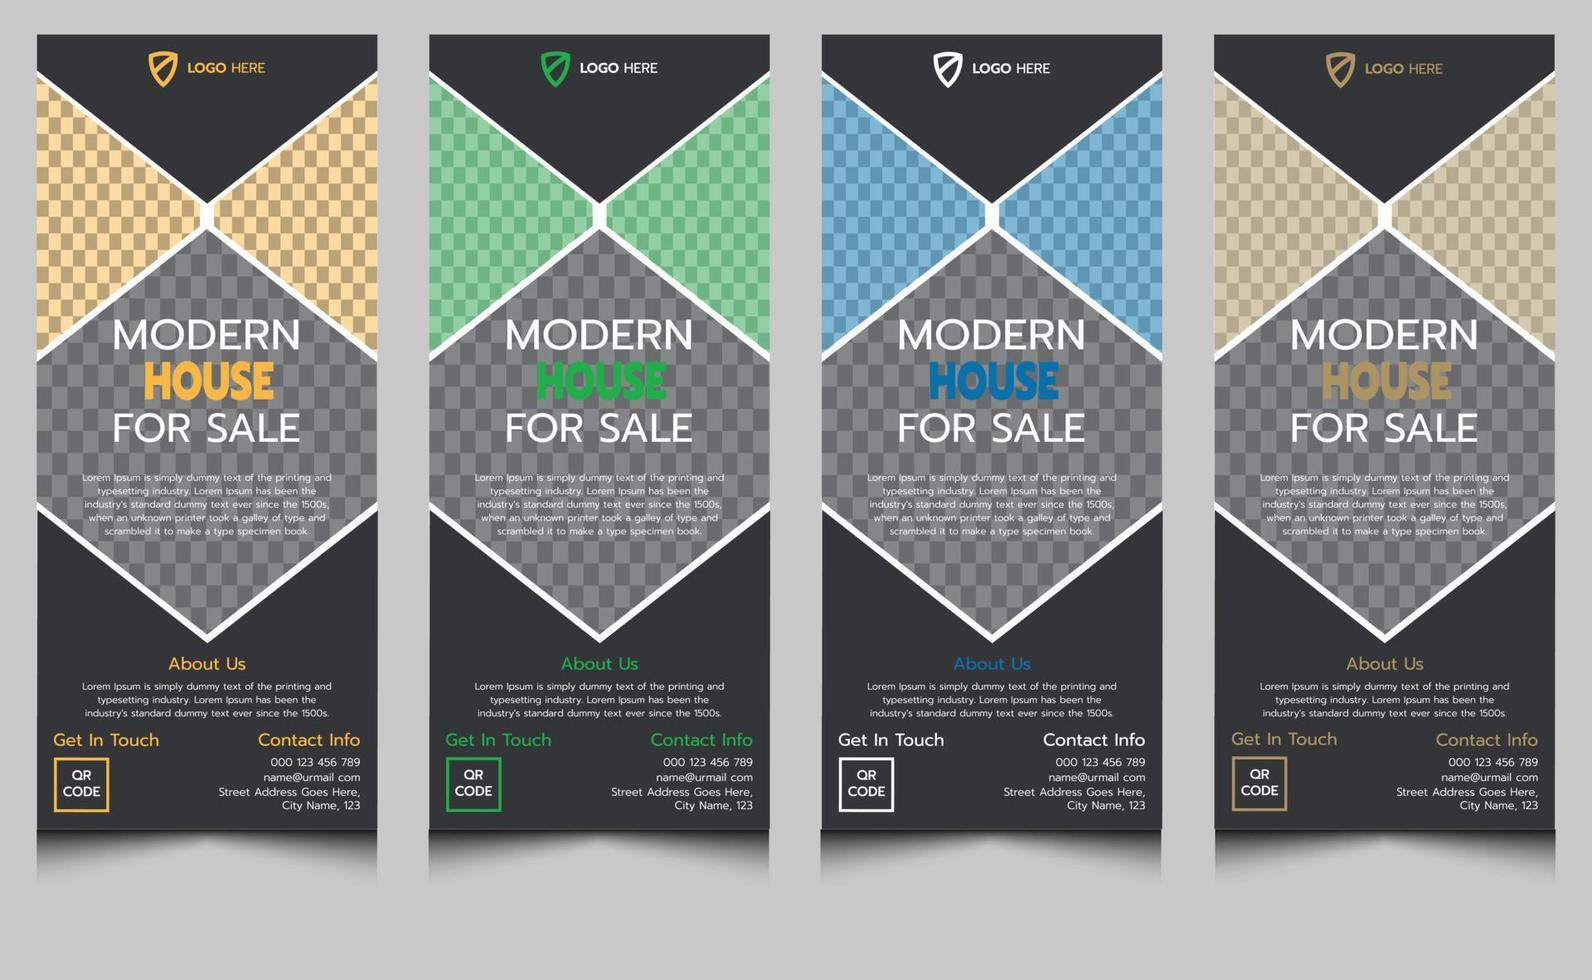 Elegant clean minimal abstract company creative modern corporate identity professional real estate construction home for sale business roll up banner template design. vector